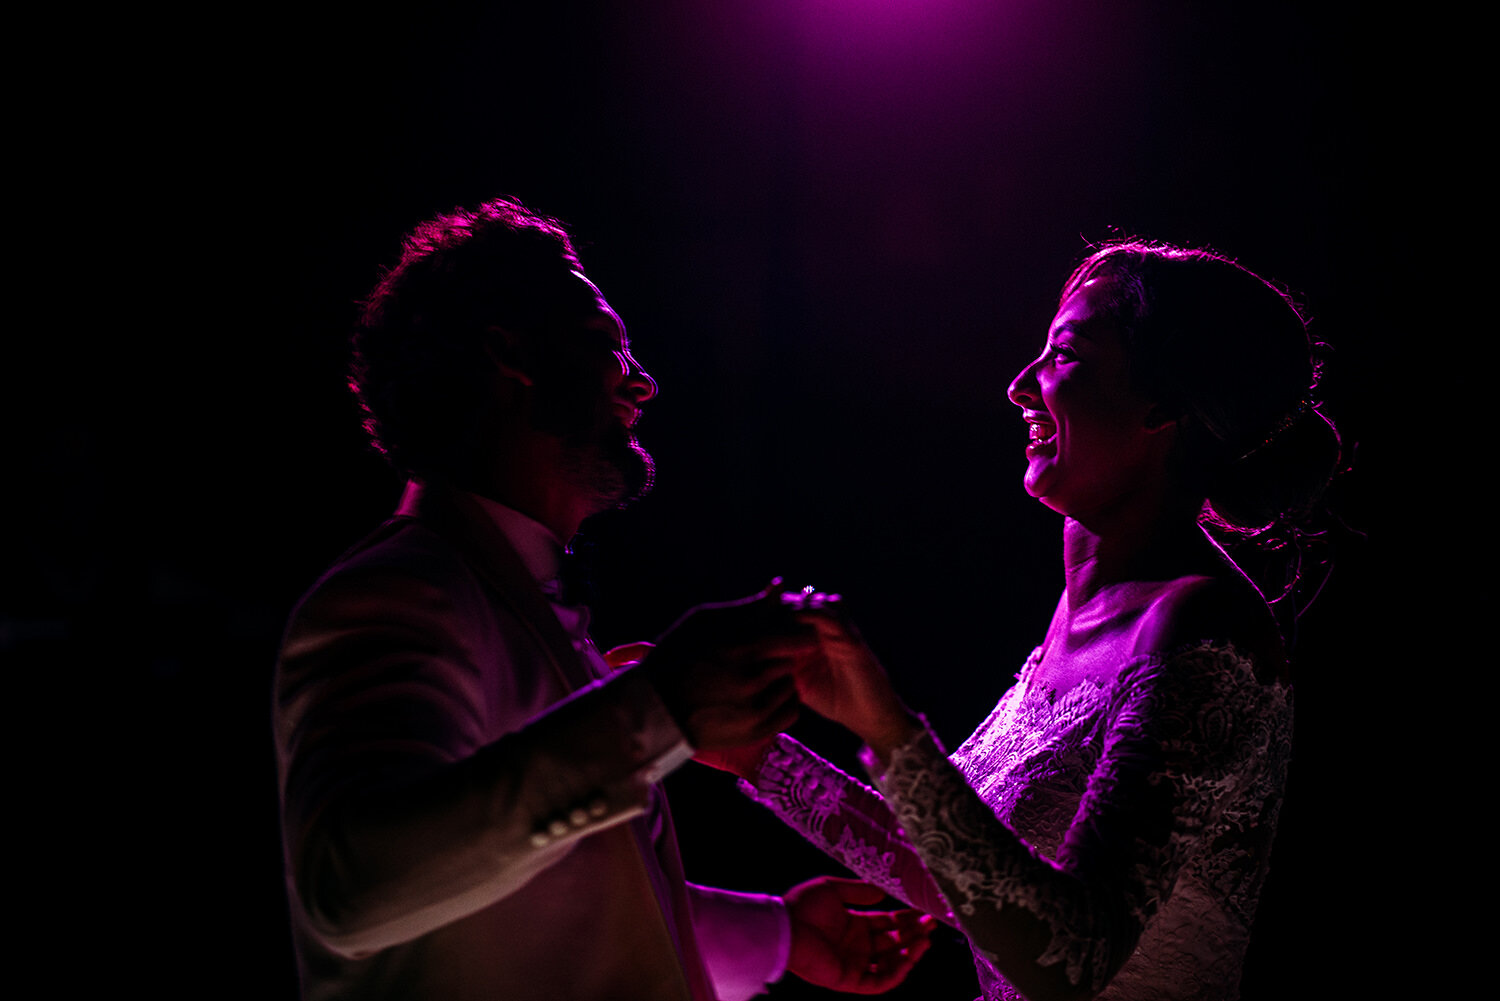  Bride and groom laughing under purple light. 